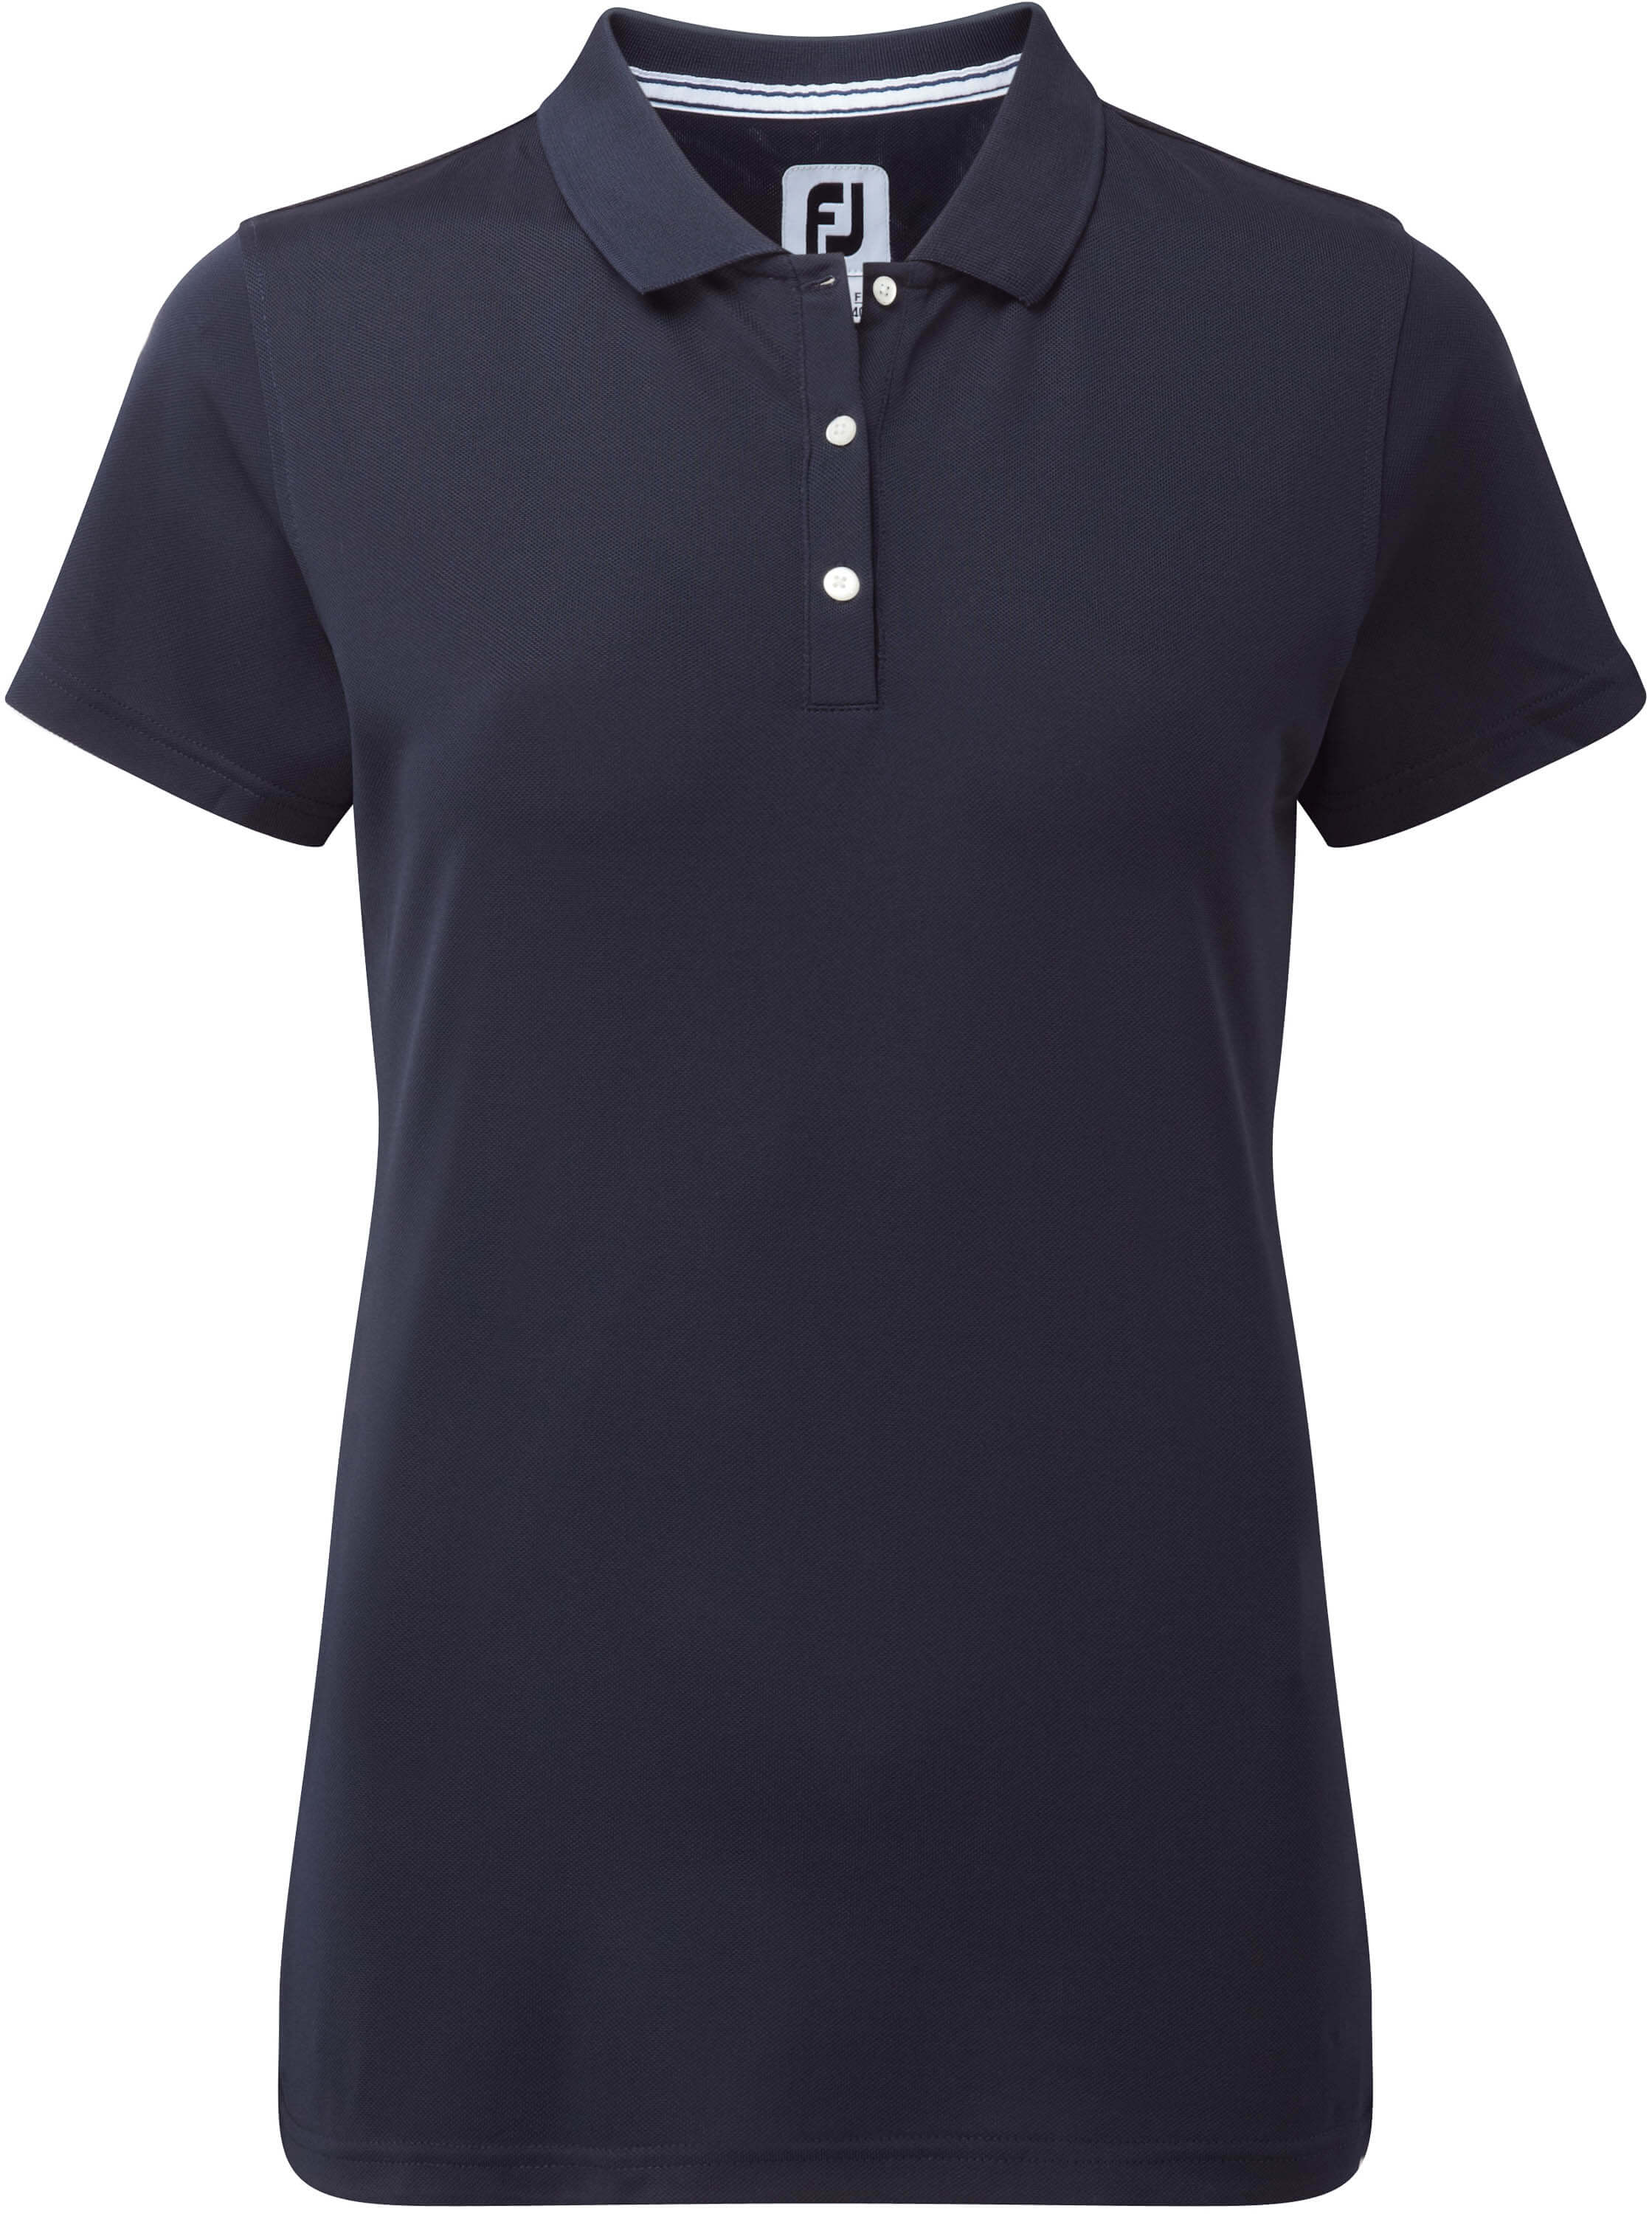 FootJoy Stretch Pique Solid Polo, navy